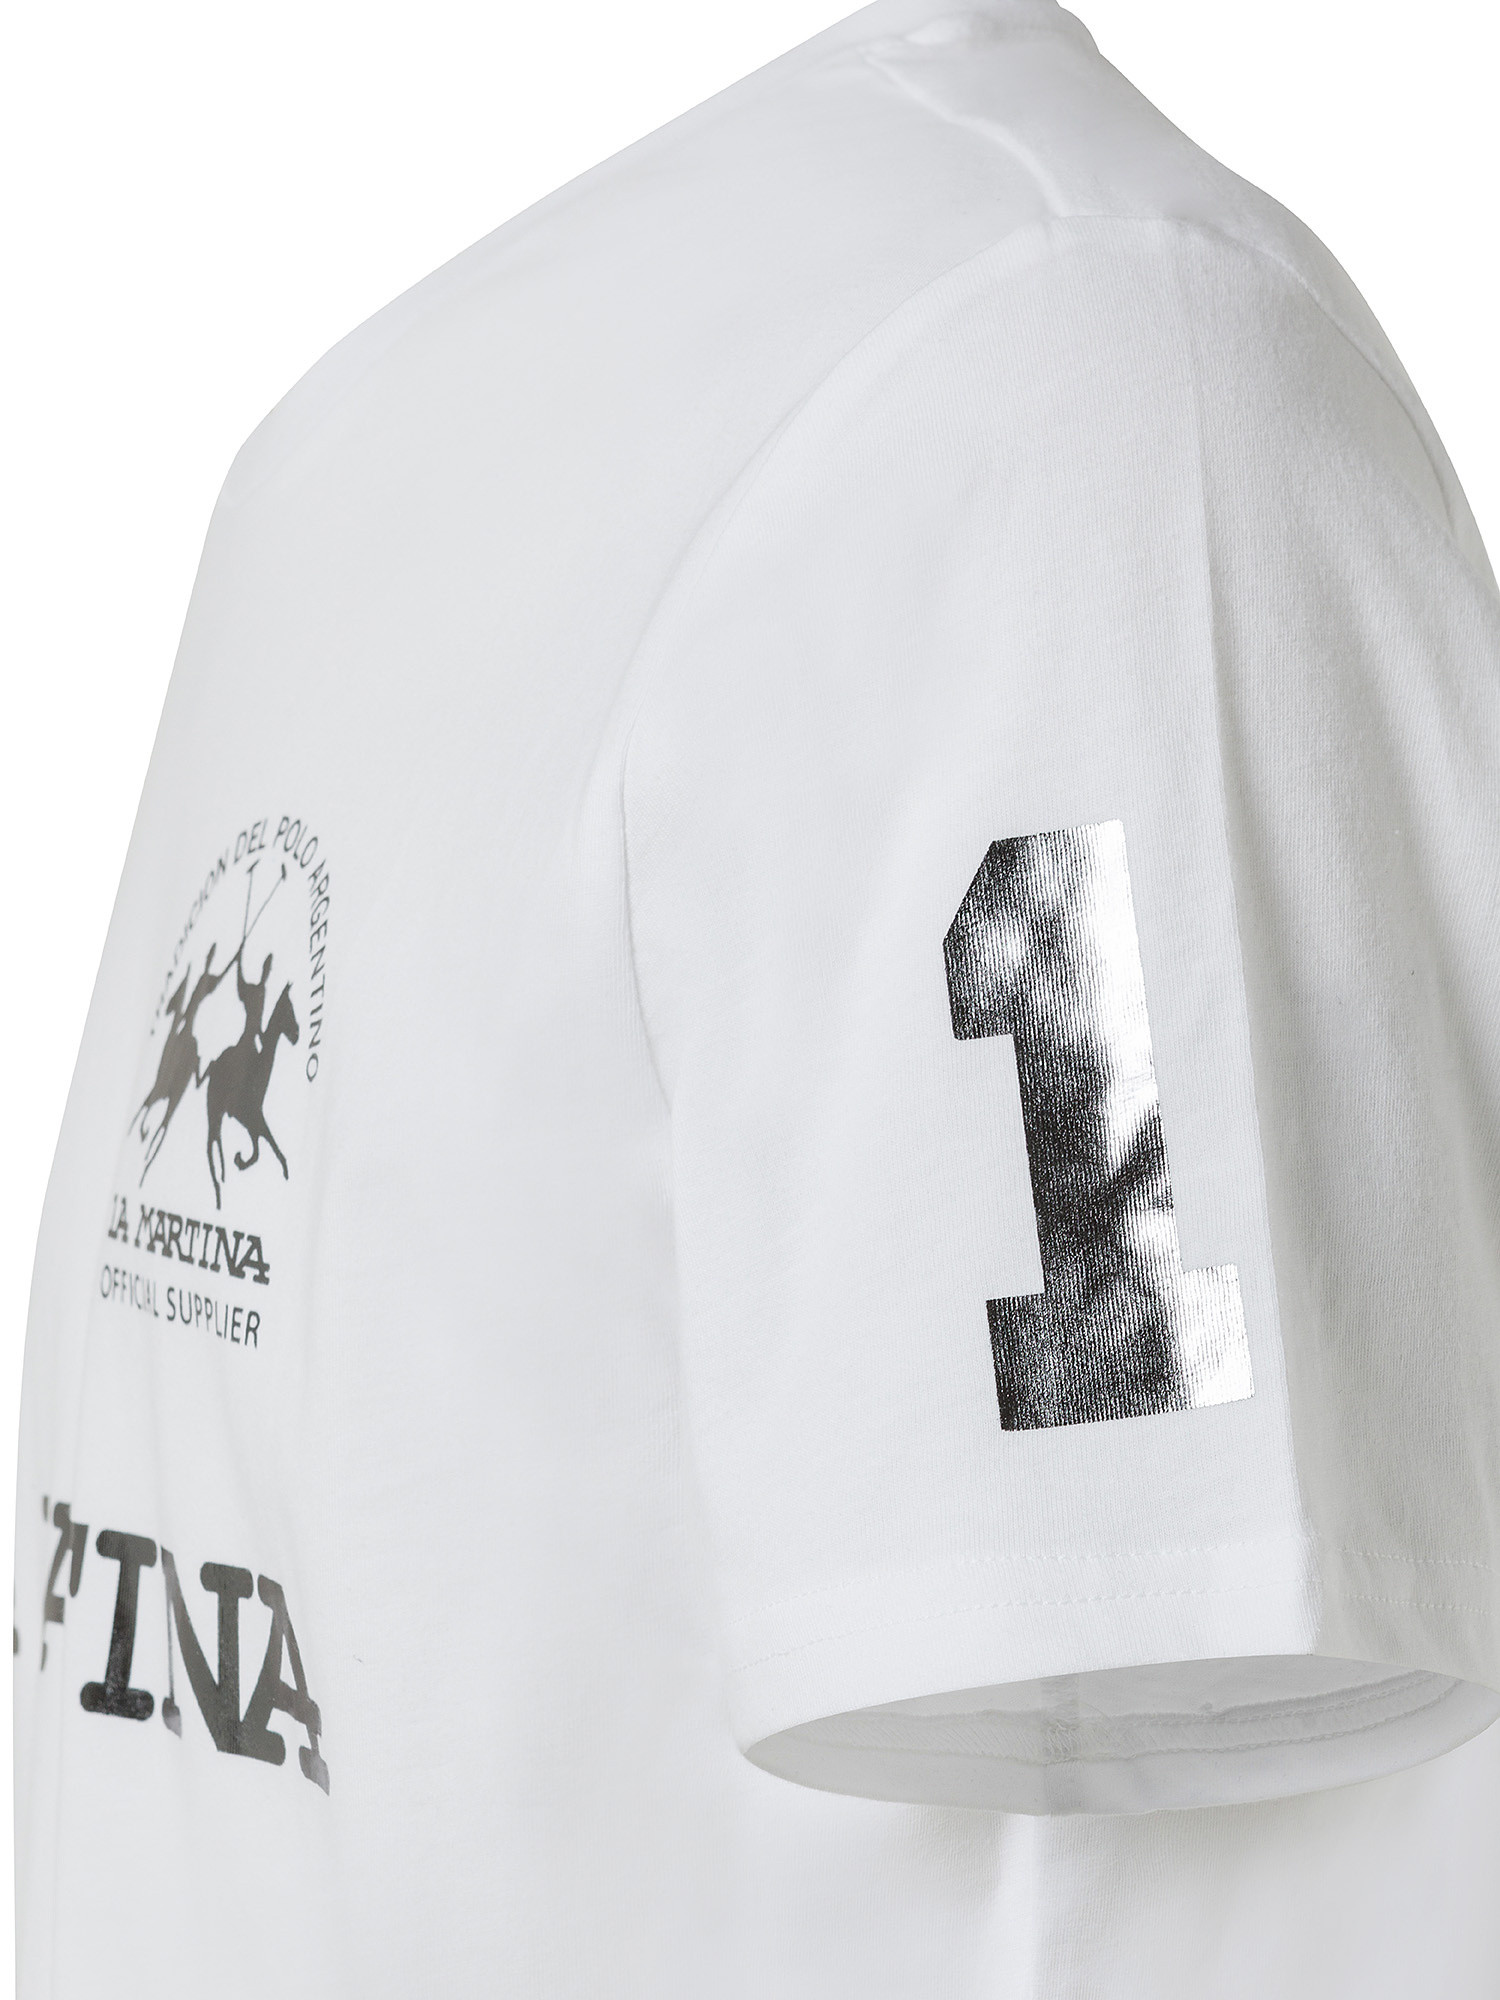 La Martina - Short-sleeved T-shirt in jersey cotton, White, large image number 2